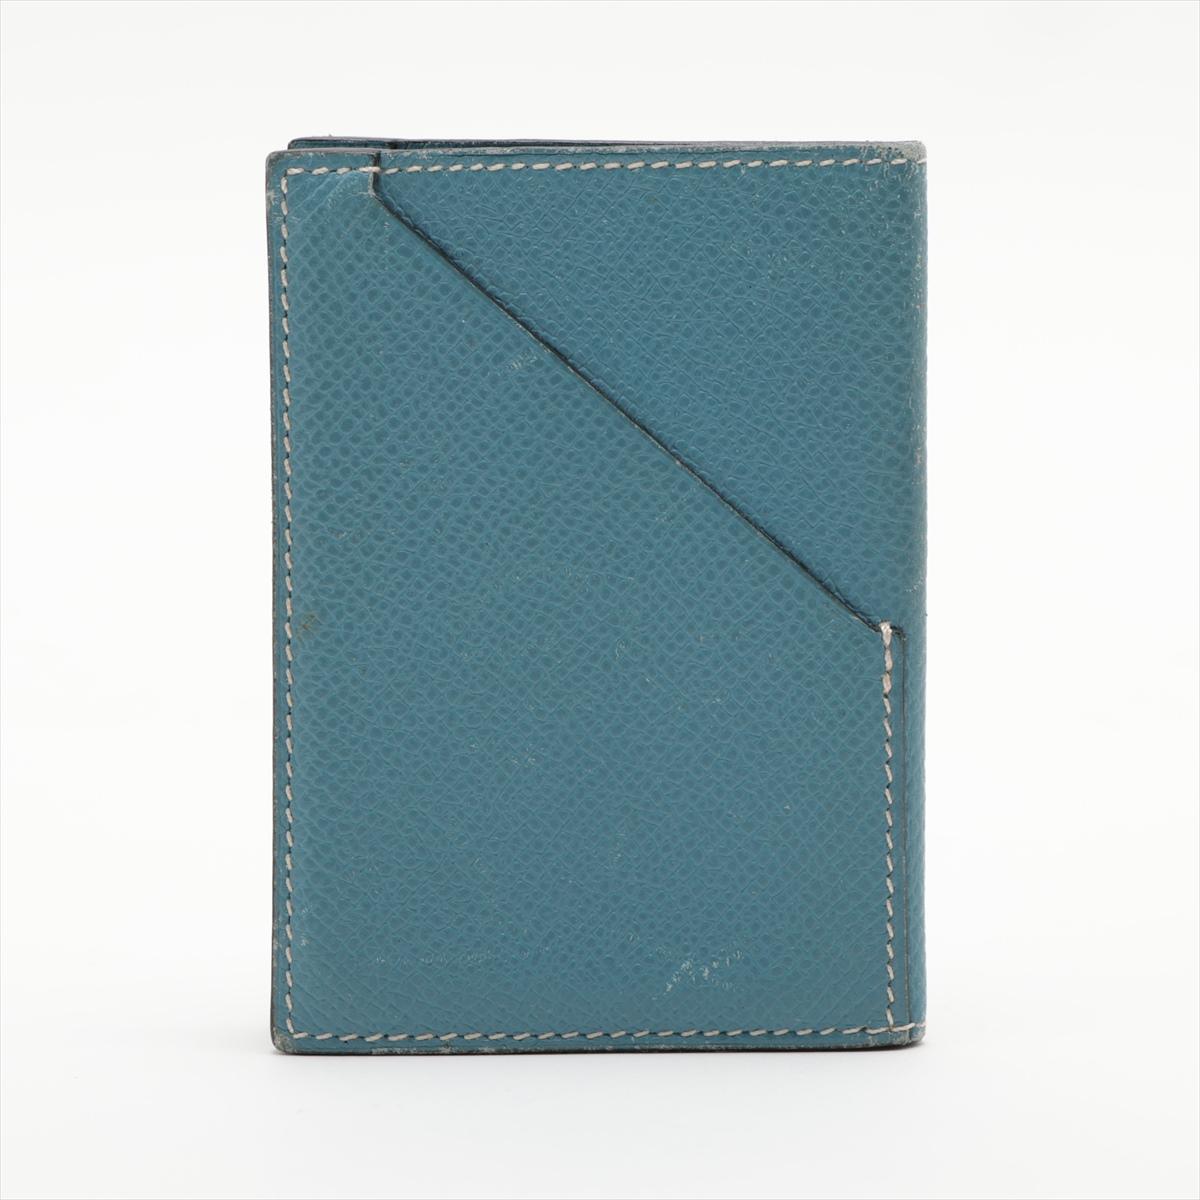 Hermès Veau Epsom Card Case Blue In Good Condition For Sale In Indianapolis, IN